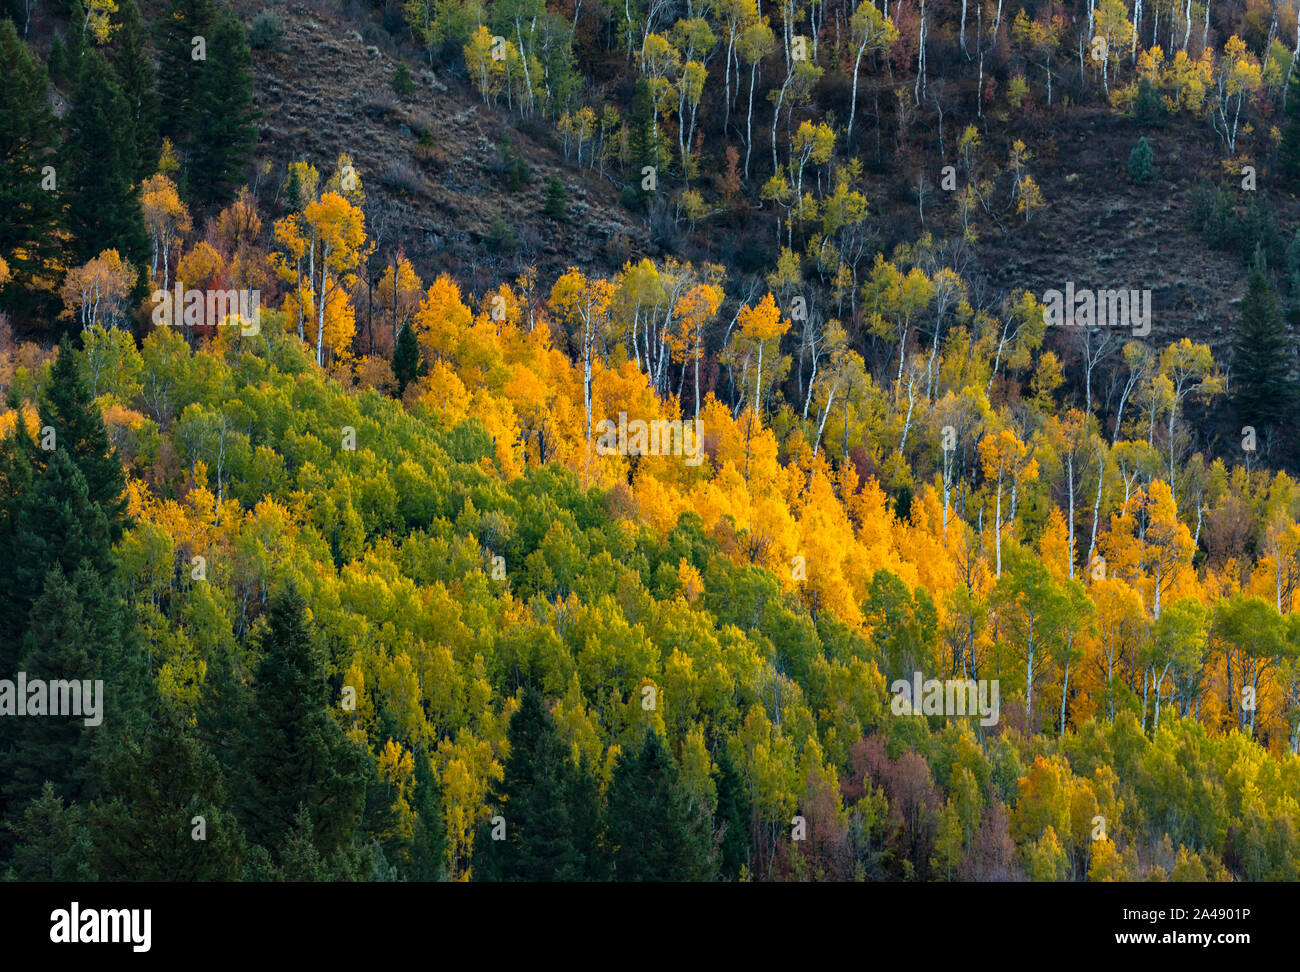 The fall colors on the trees along US Highway 89, the Logan Canyon Scenic Byway in Logan Canyon, Uinta-Wasatch-Cache National Forest, Utah, USA. Stock Photo